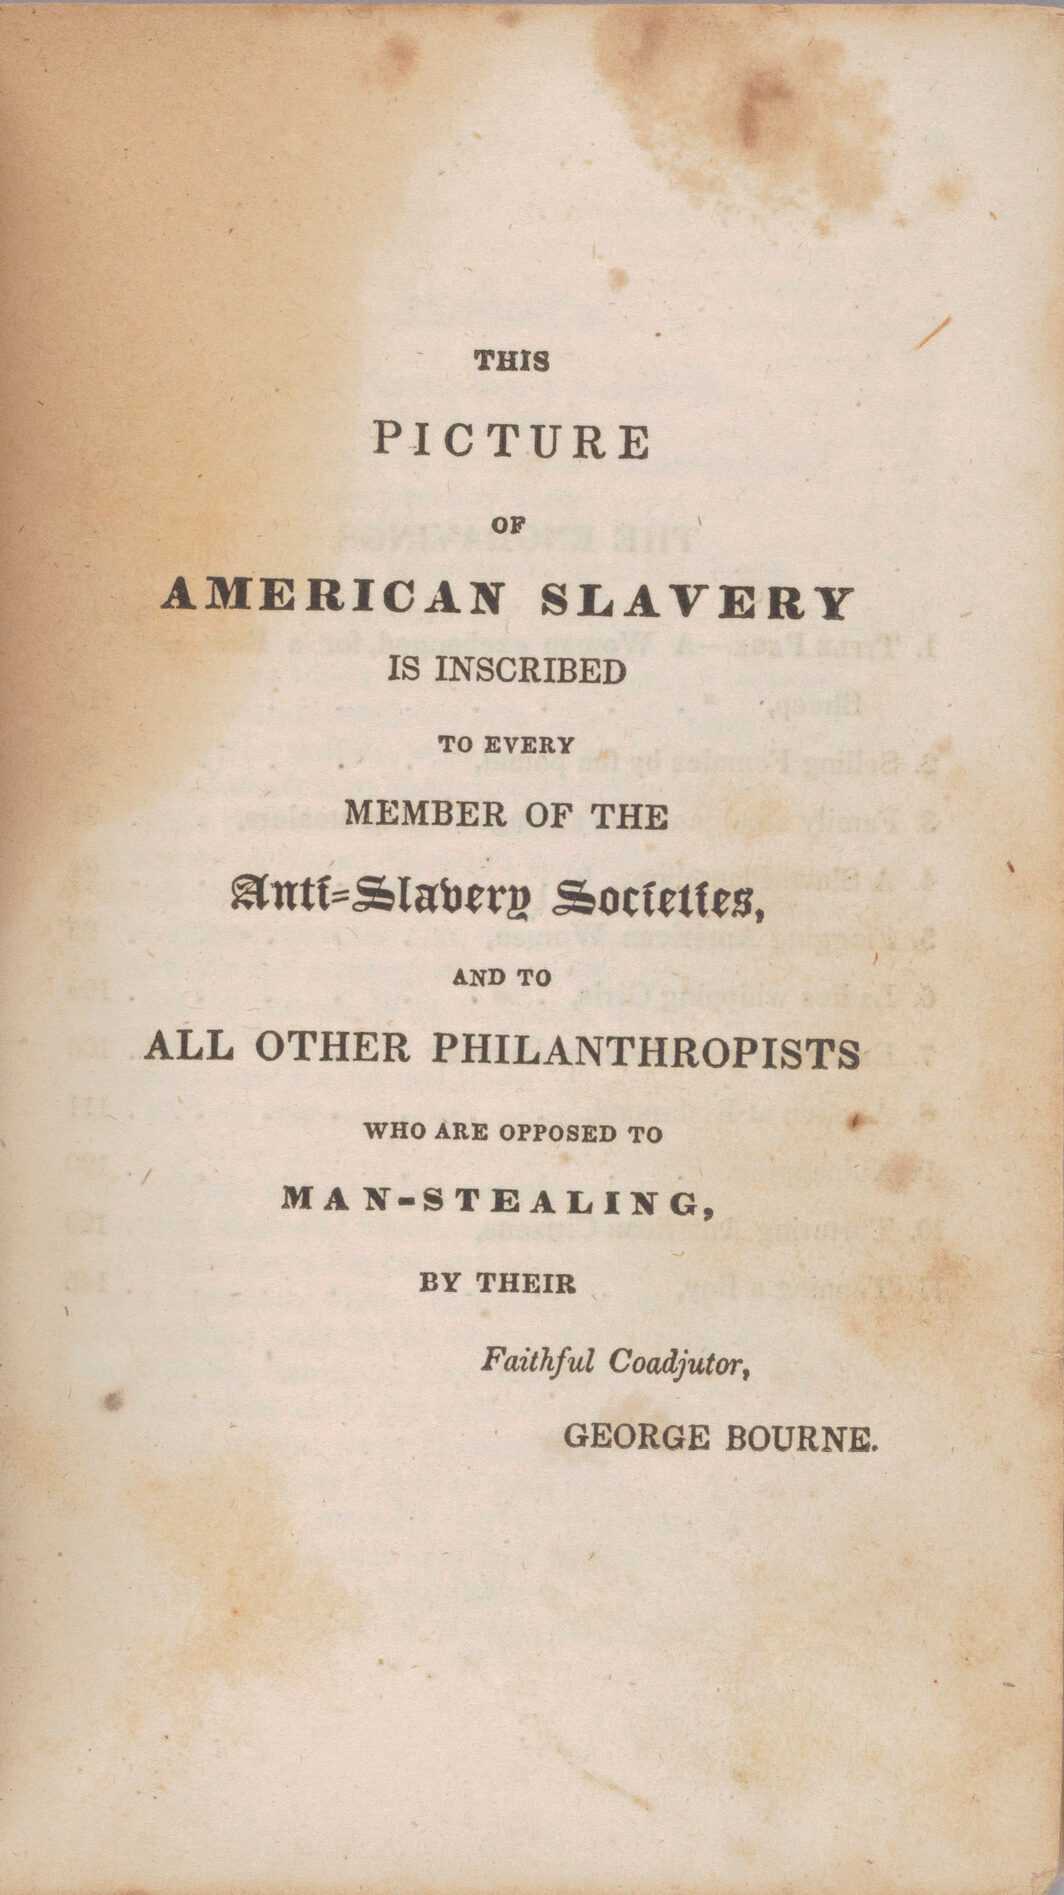 This book is entitled "Picture of Slavery in the United States of America," and was written by Reverend George Bourne. It was published by Edwin Hunt in 1834. The text is bound in a plain dark blue paper cover with text on the interior pages printed in black ink. There are ten (10) engravings included, featuring images related to scenes of slavery.